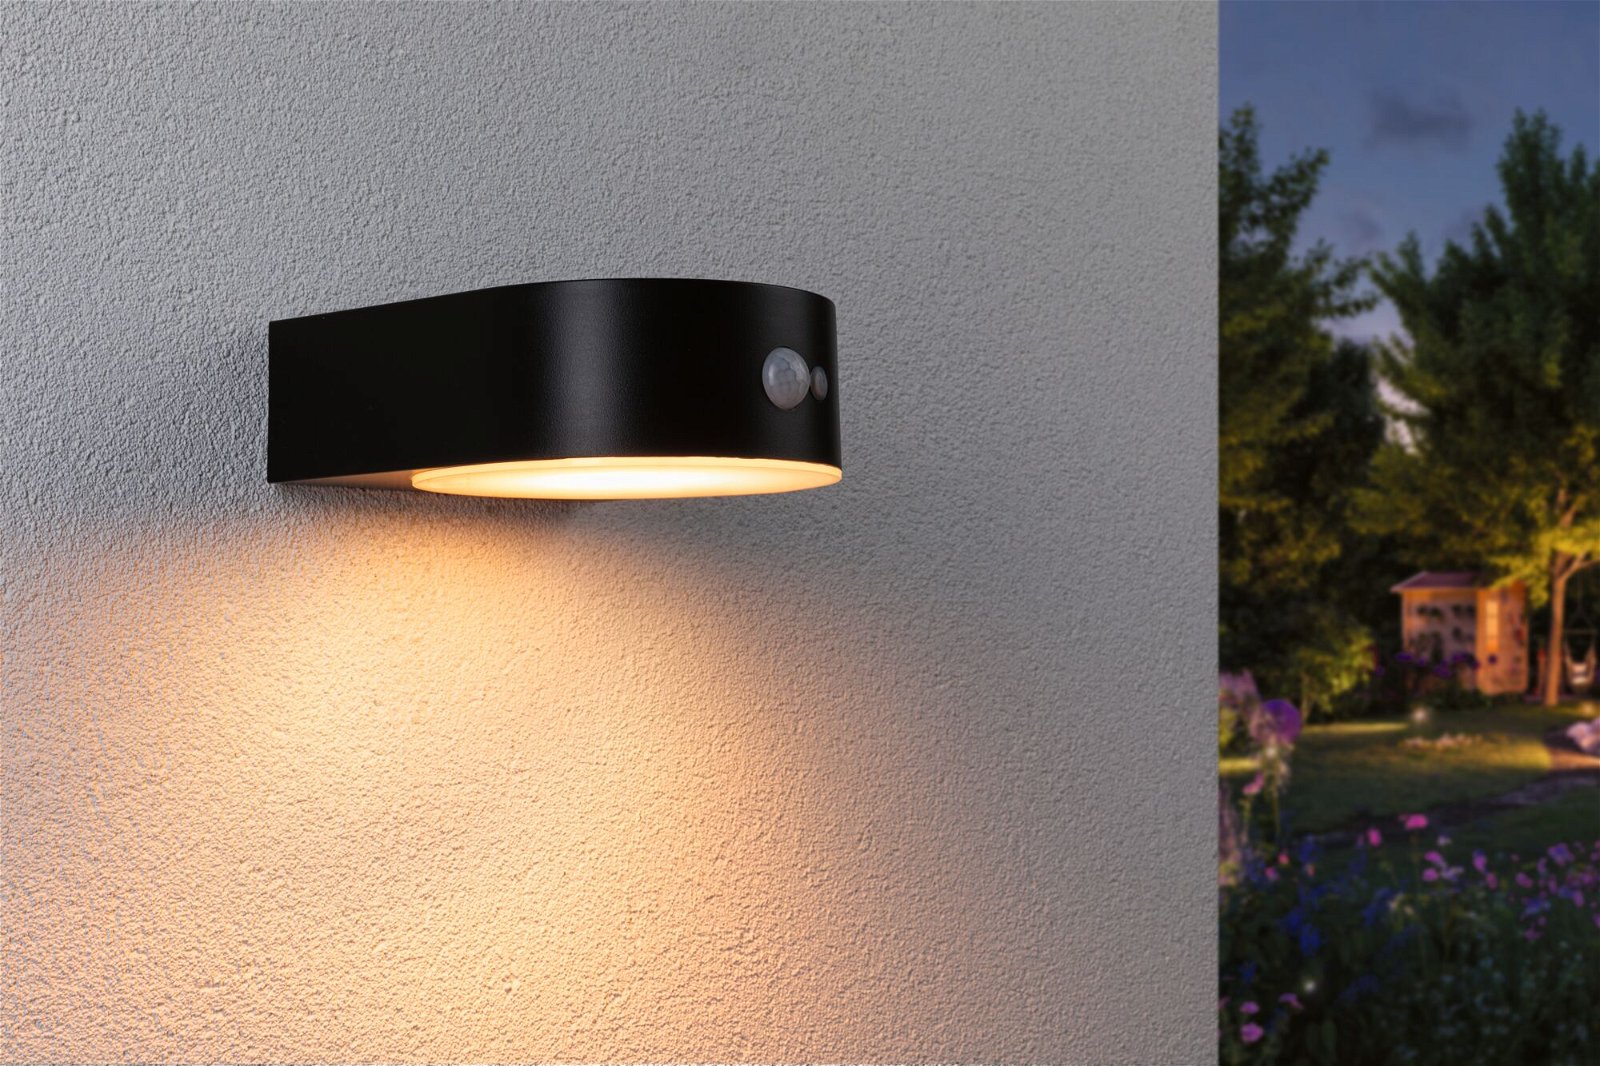 Solar LED Exterior wall luminaire Eileen Motion sensor insect friendly IP44 2200K 300lm Black